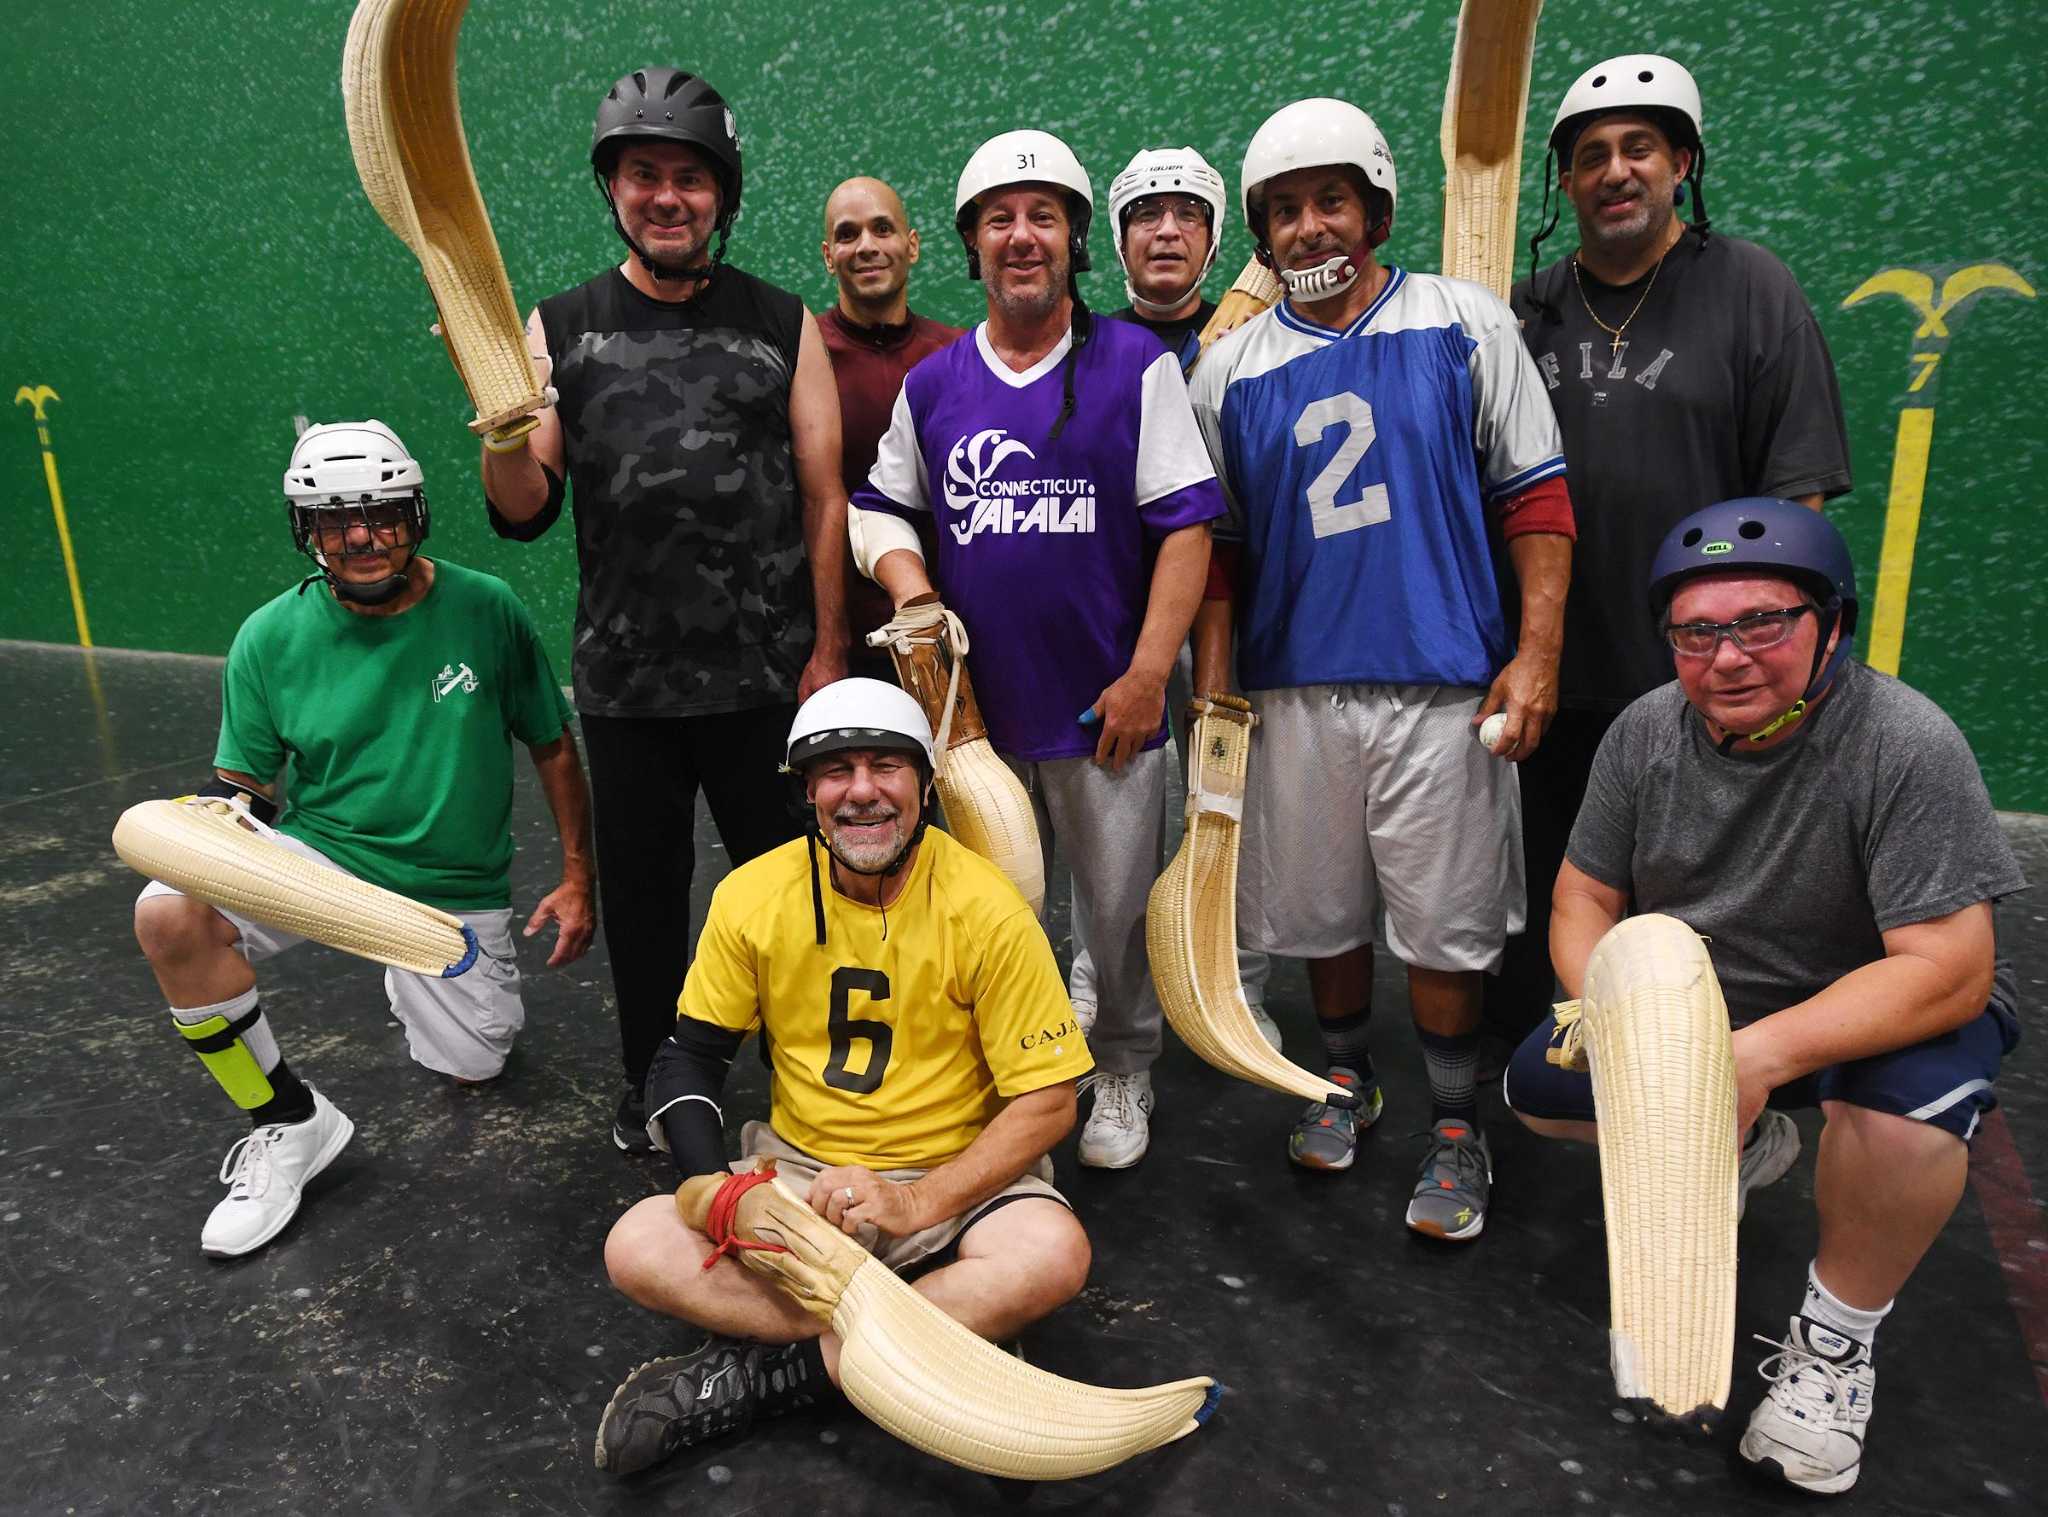 Connecticut Amateur Jai-Alai draws players of all levels 20 years after states last pro fronton closed hq image